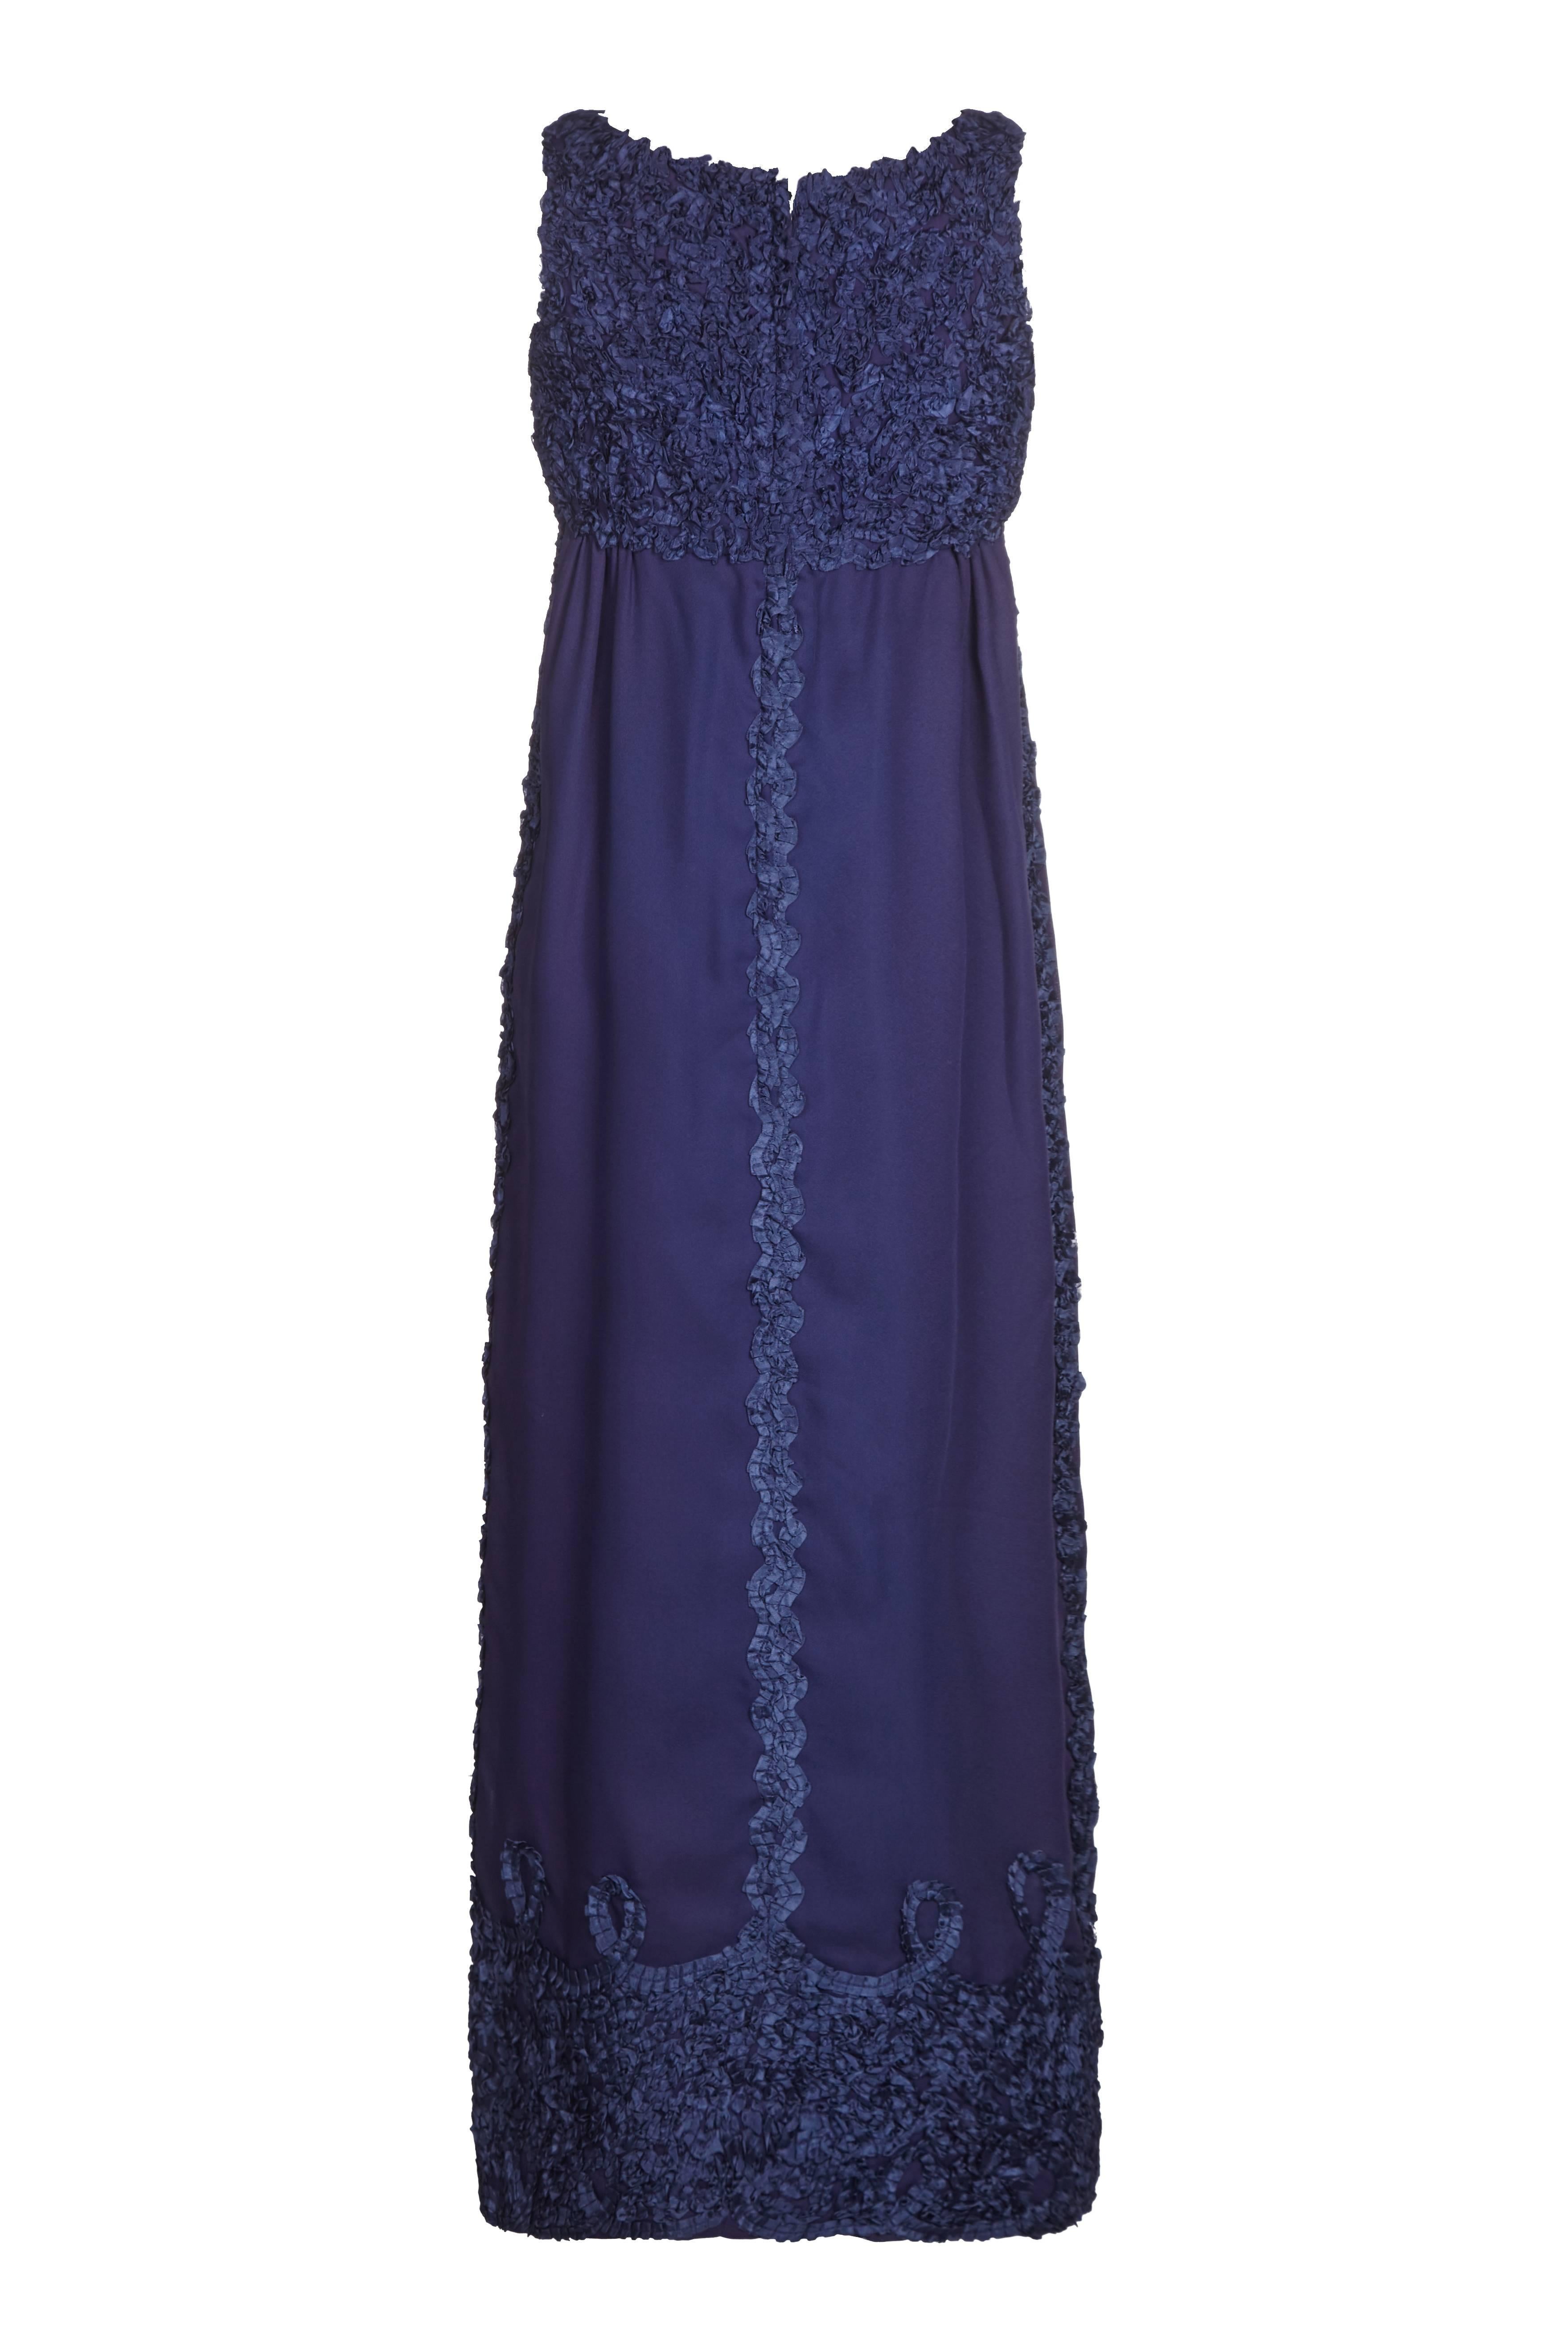 This attractive Jean Varon 1960s Midnight Blue evening gown is a sophisticated departure from the designer's trademark space-age style pieces, and has a softer, more feminine focus. The dress is sleeveless, with a classic Empire-Line cut that falls